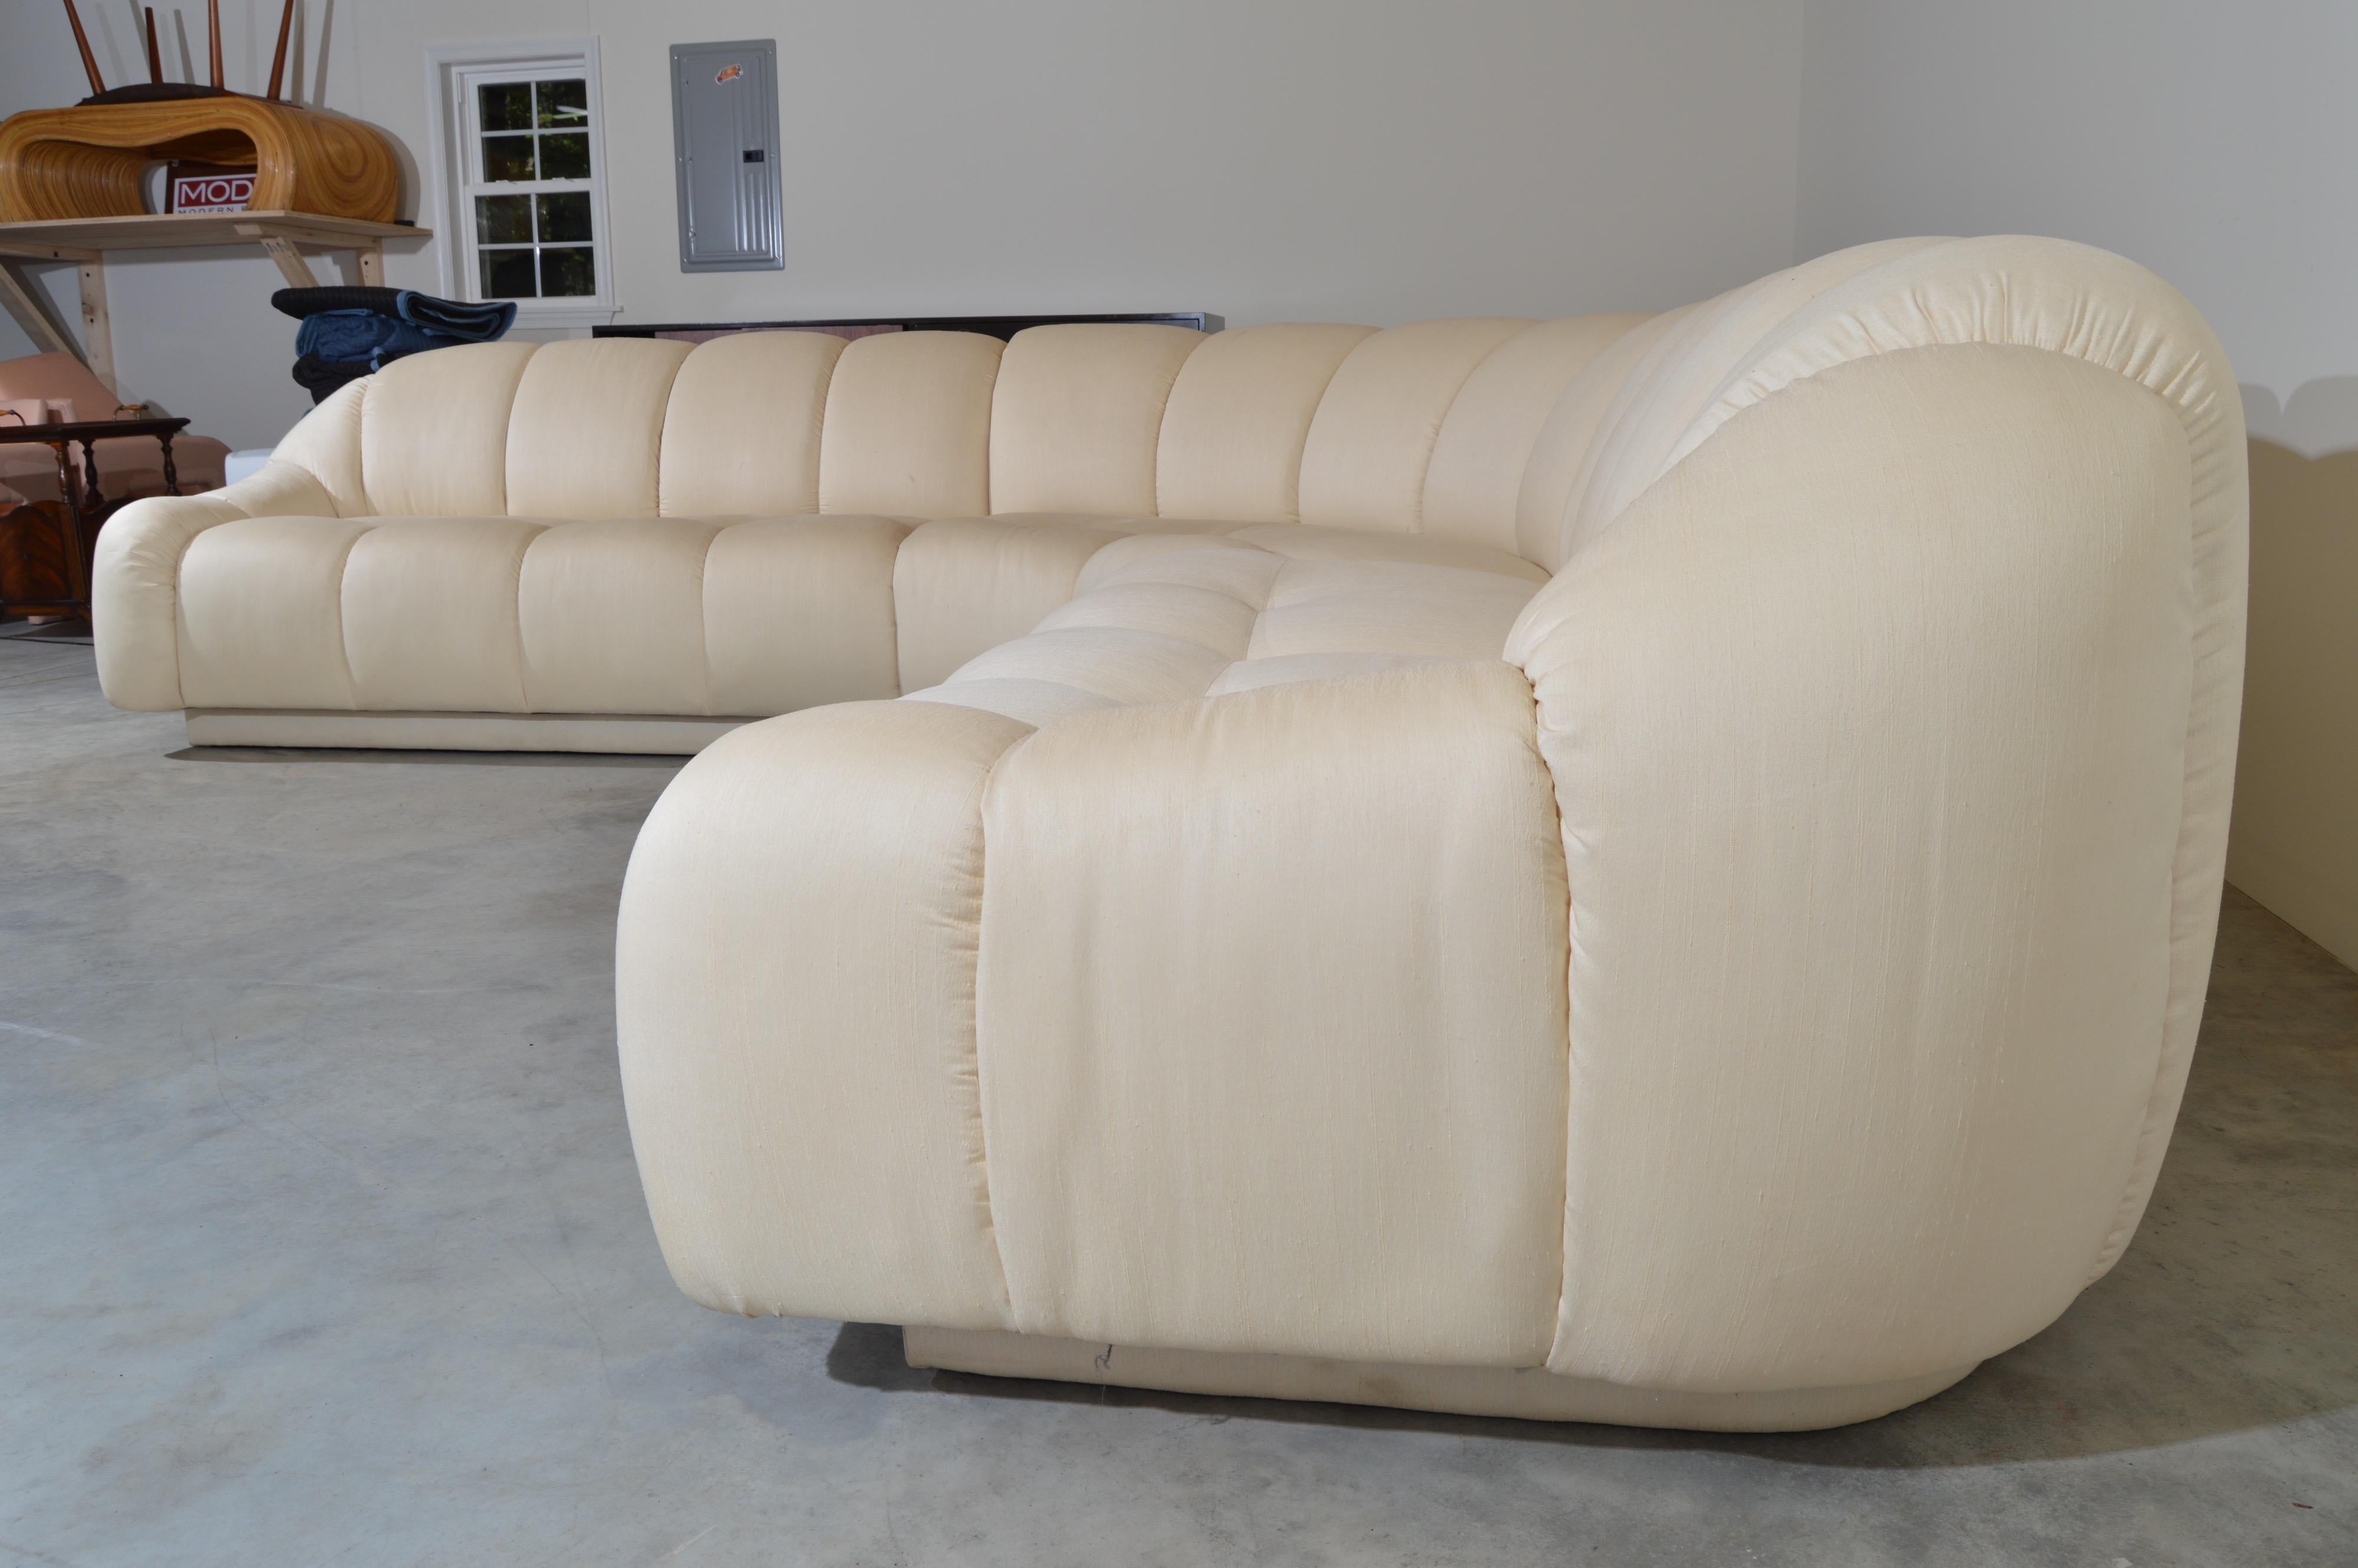 Hollywood Regency Channel Tufted Sectional Sofa in the Manner of Steve Chase circa 1980